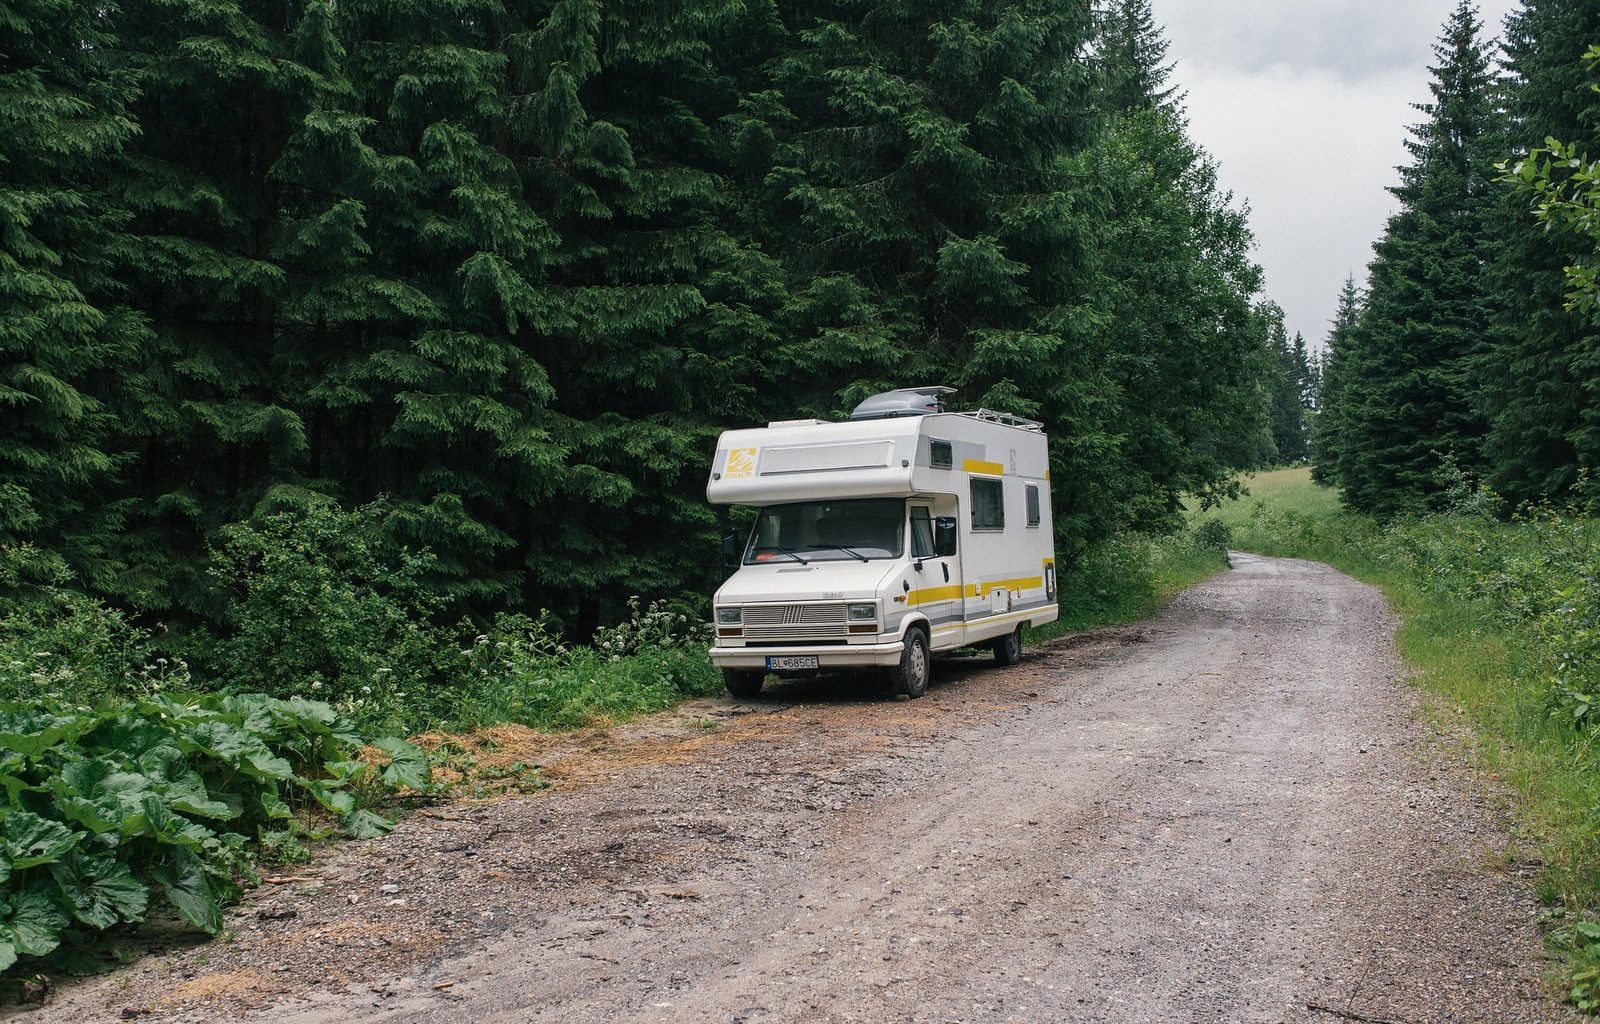 white and green rv on dirt road